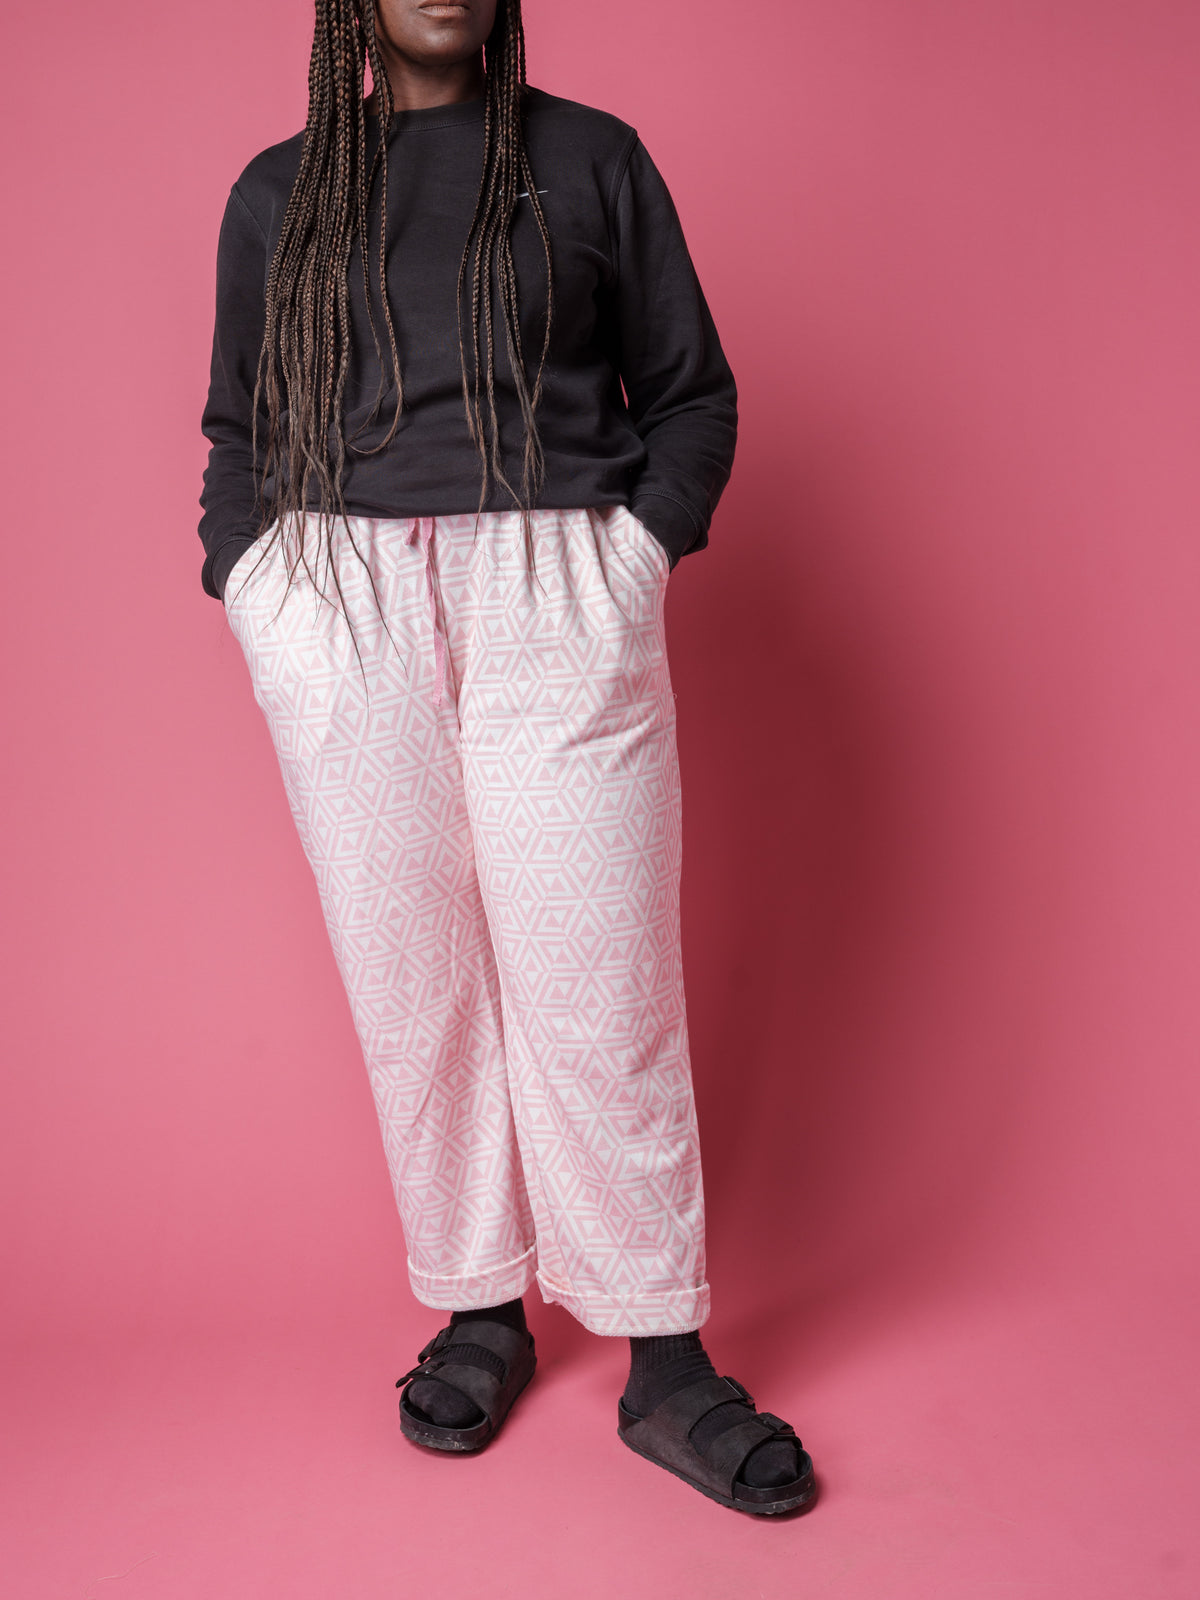 Jersey Cotton Unisex Jogging bottoms in 'Pink Honeycomb'